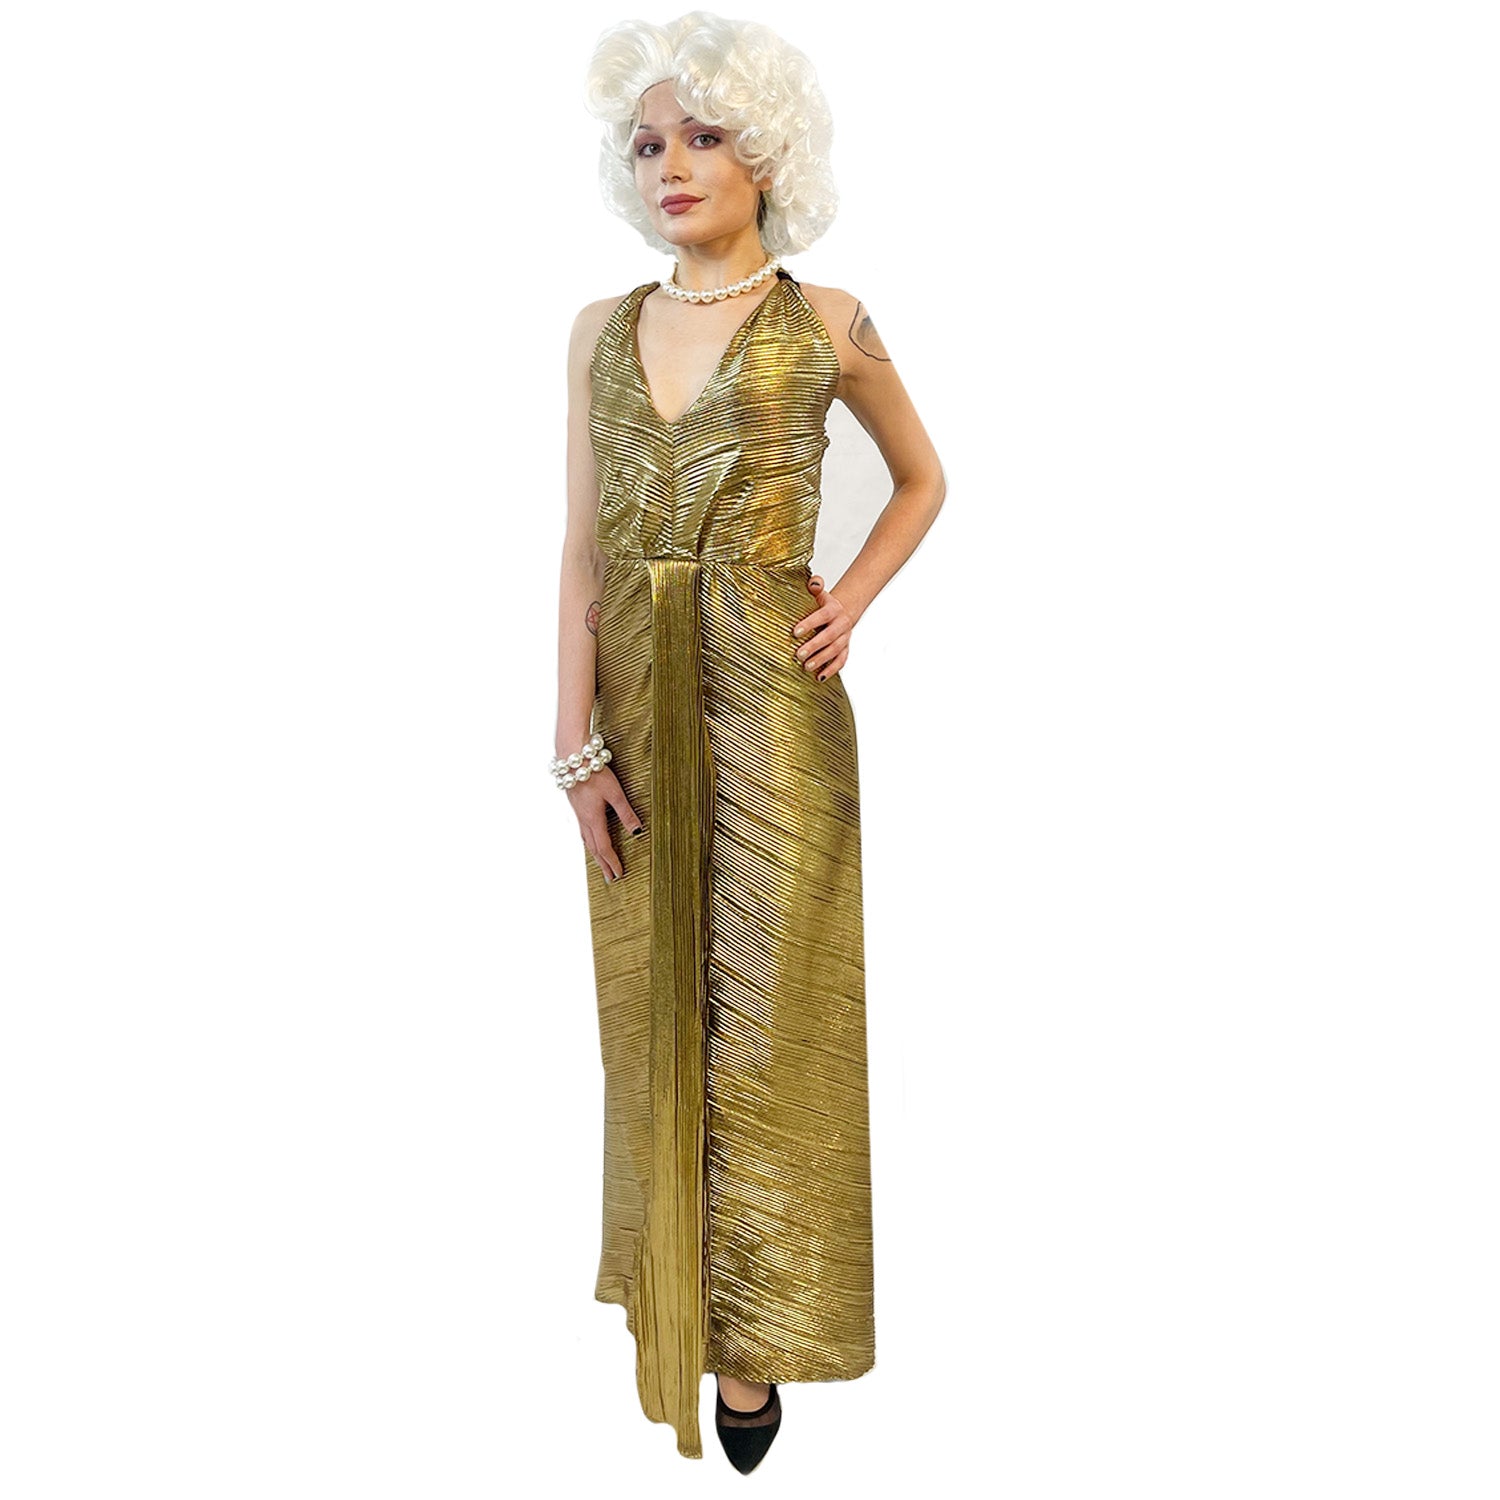 Exclusive Marilyn Monroe Iconic Gold Dress Women's Adult Costume